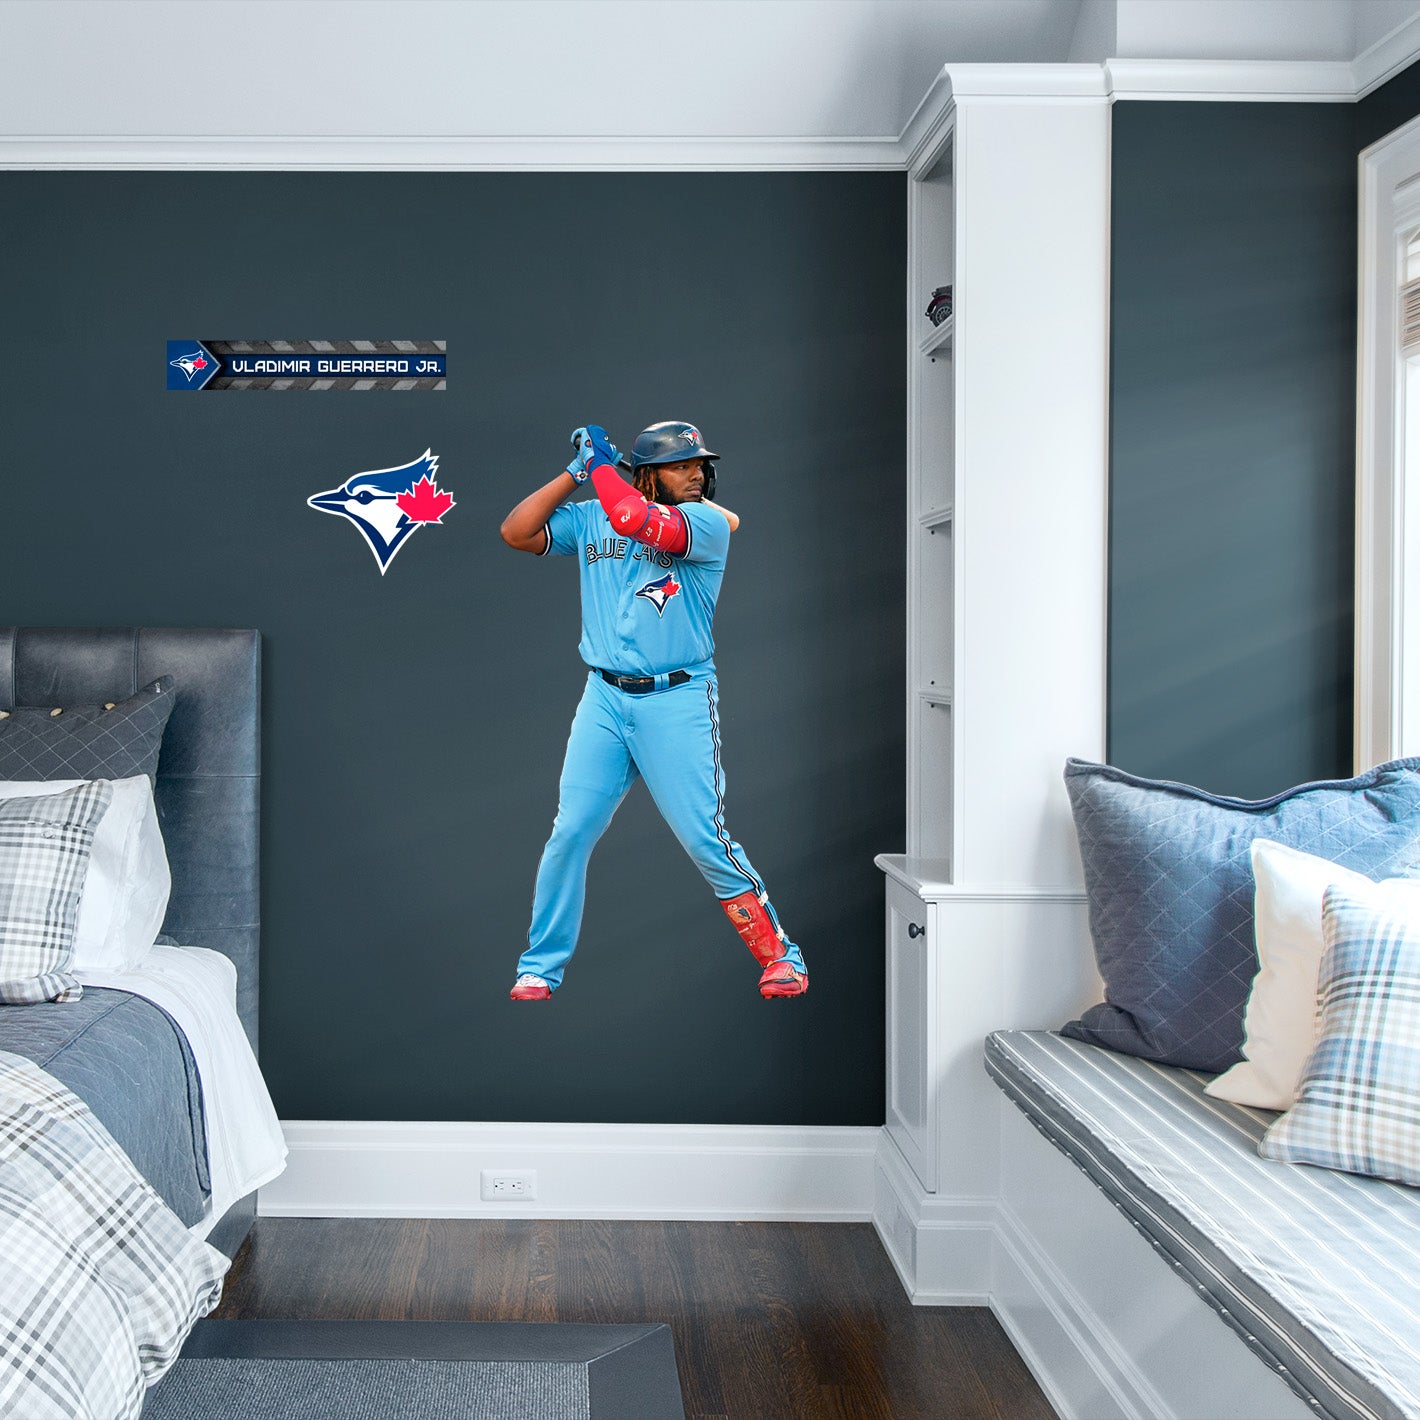 Tampa Bay Rays: Wander Franco 2021 - MLB Removable Adhesive Wall Decal Giant Athlete +2 Wall Decals 26W x 51H